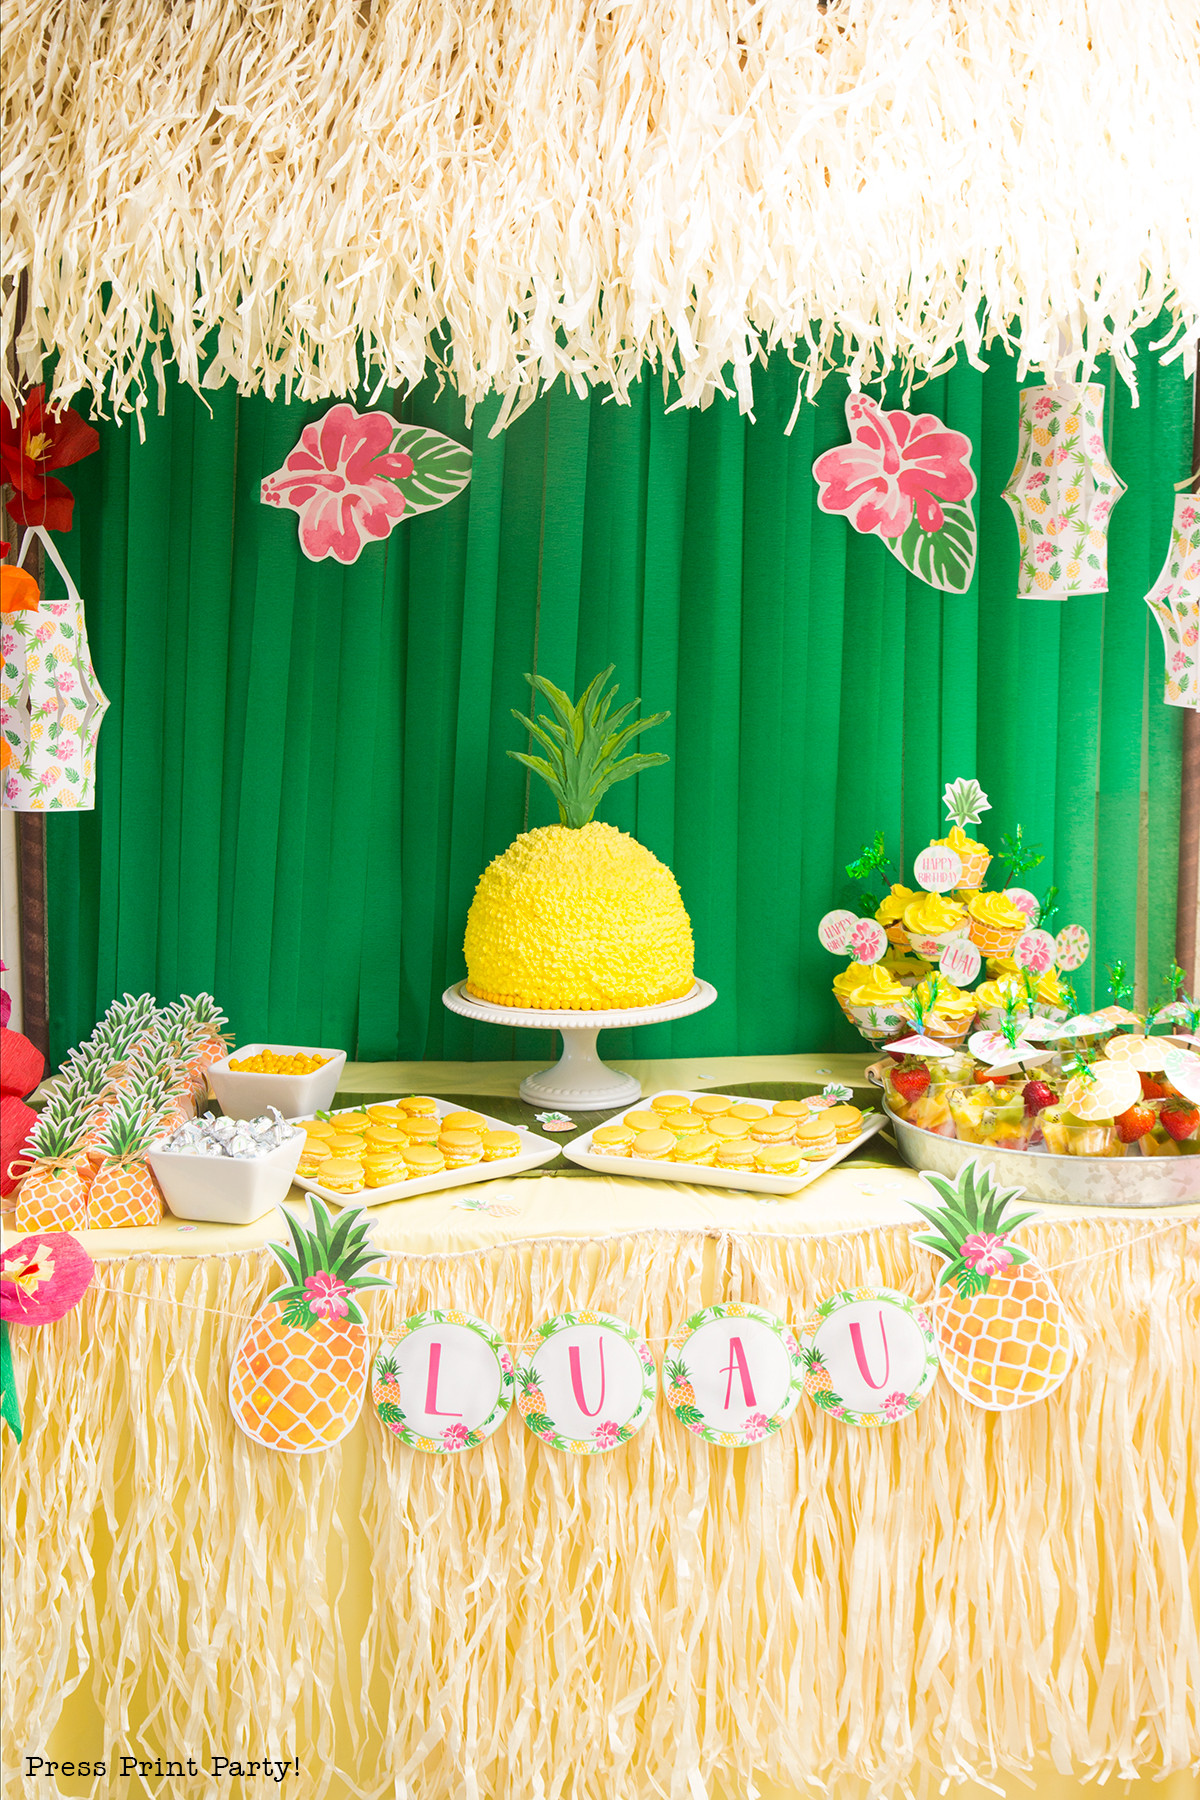 Decoration Birthday Party
 Sweet "Party Like a Pineapple " Birthday Party Luau